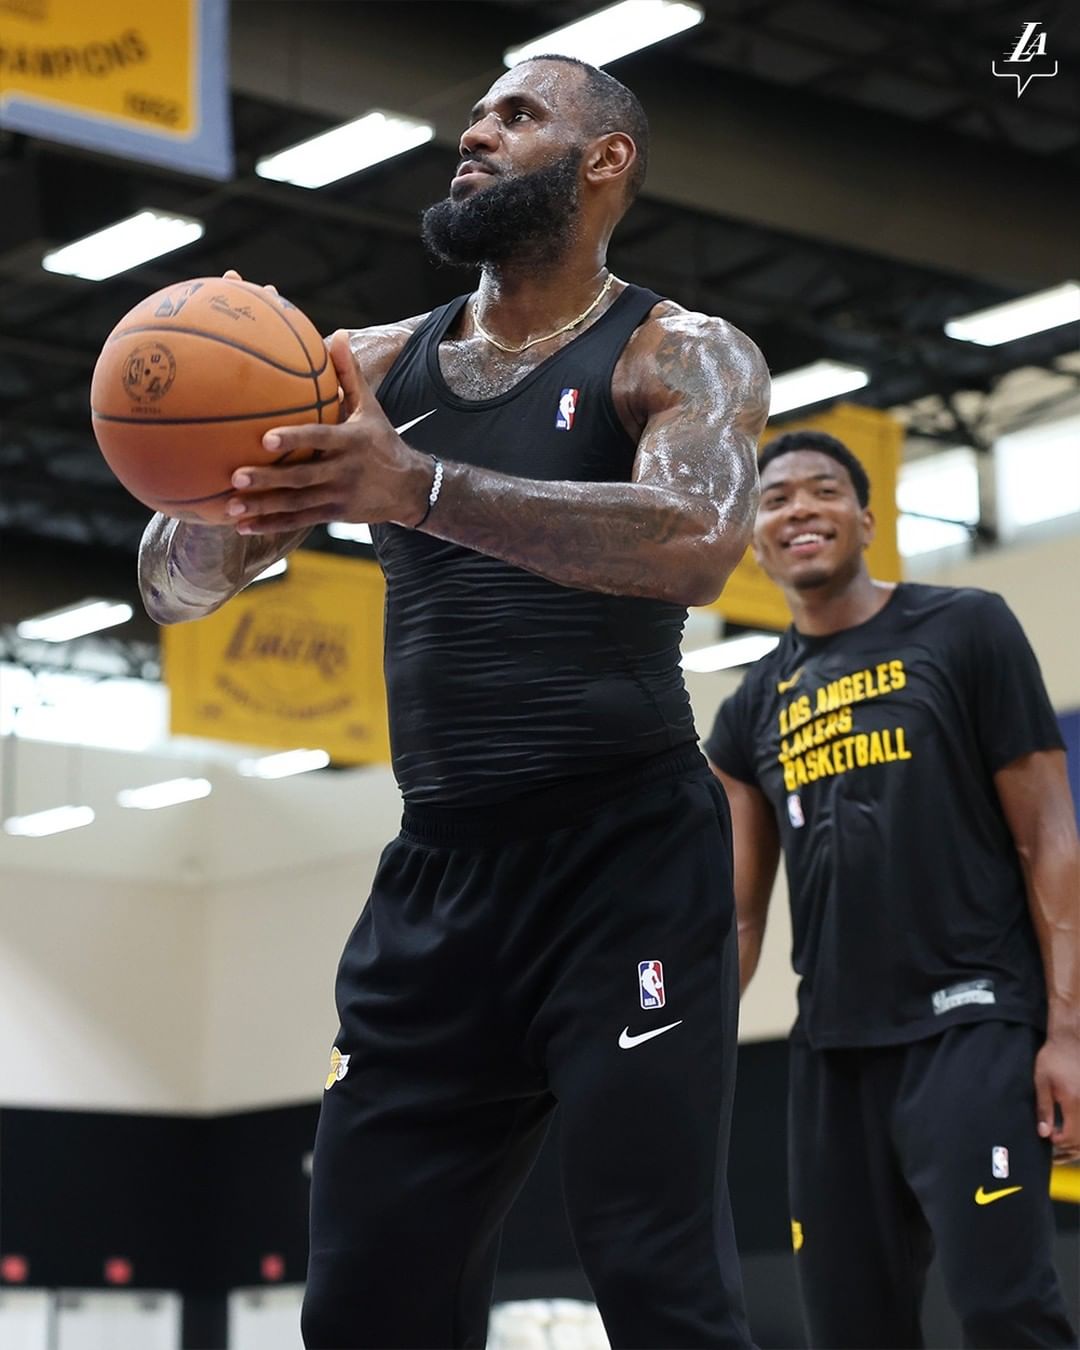 LeBron James and Rui Hachimura show off full energy in training as they're ready for new NBA season